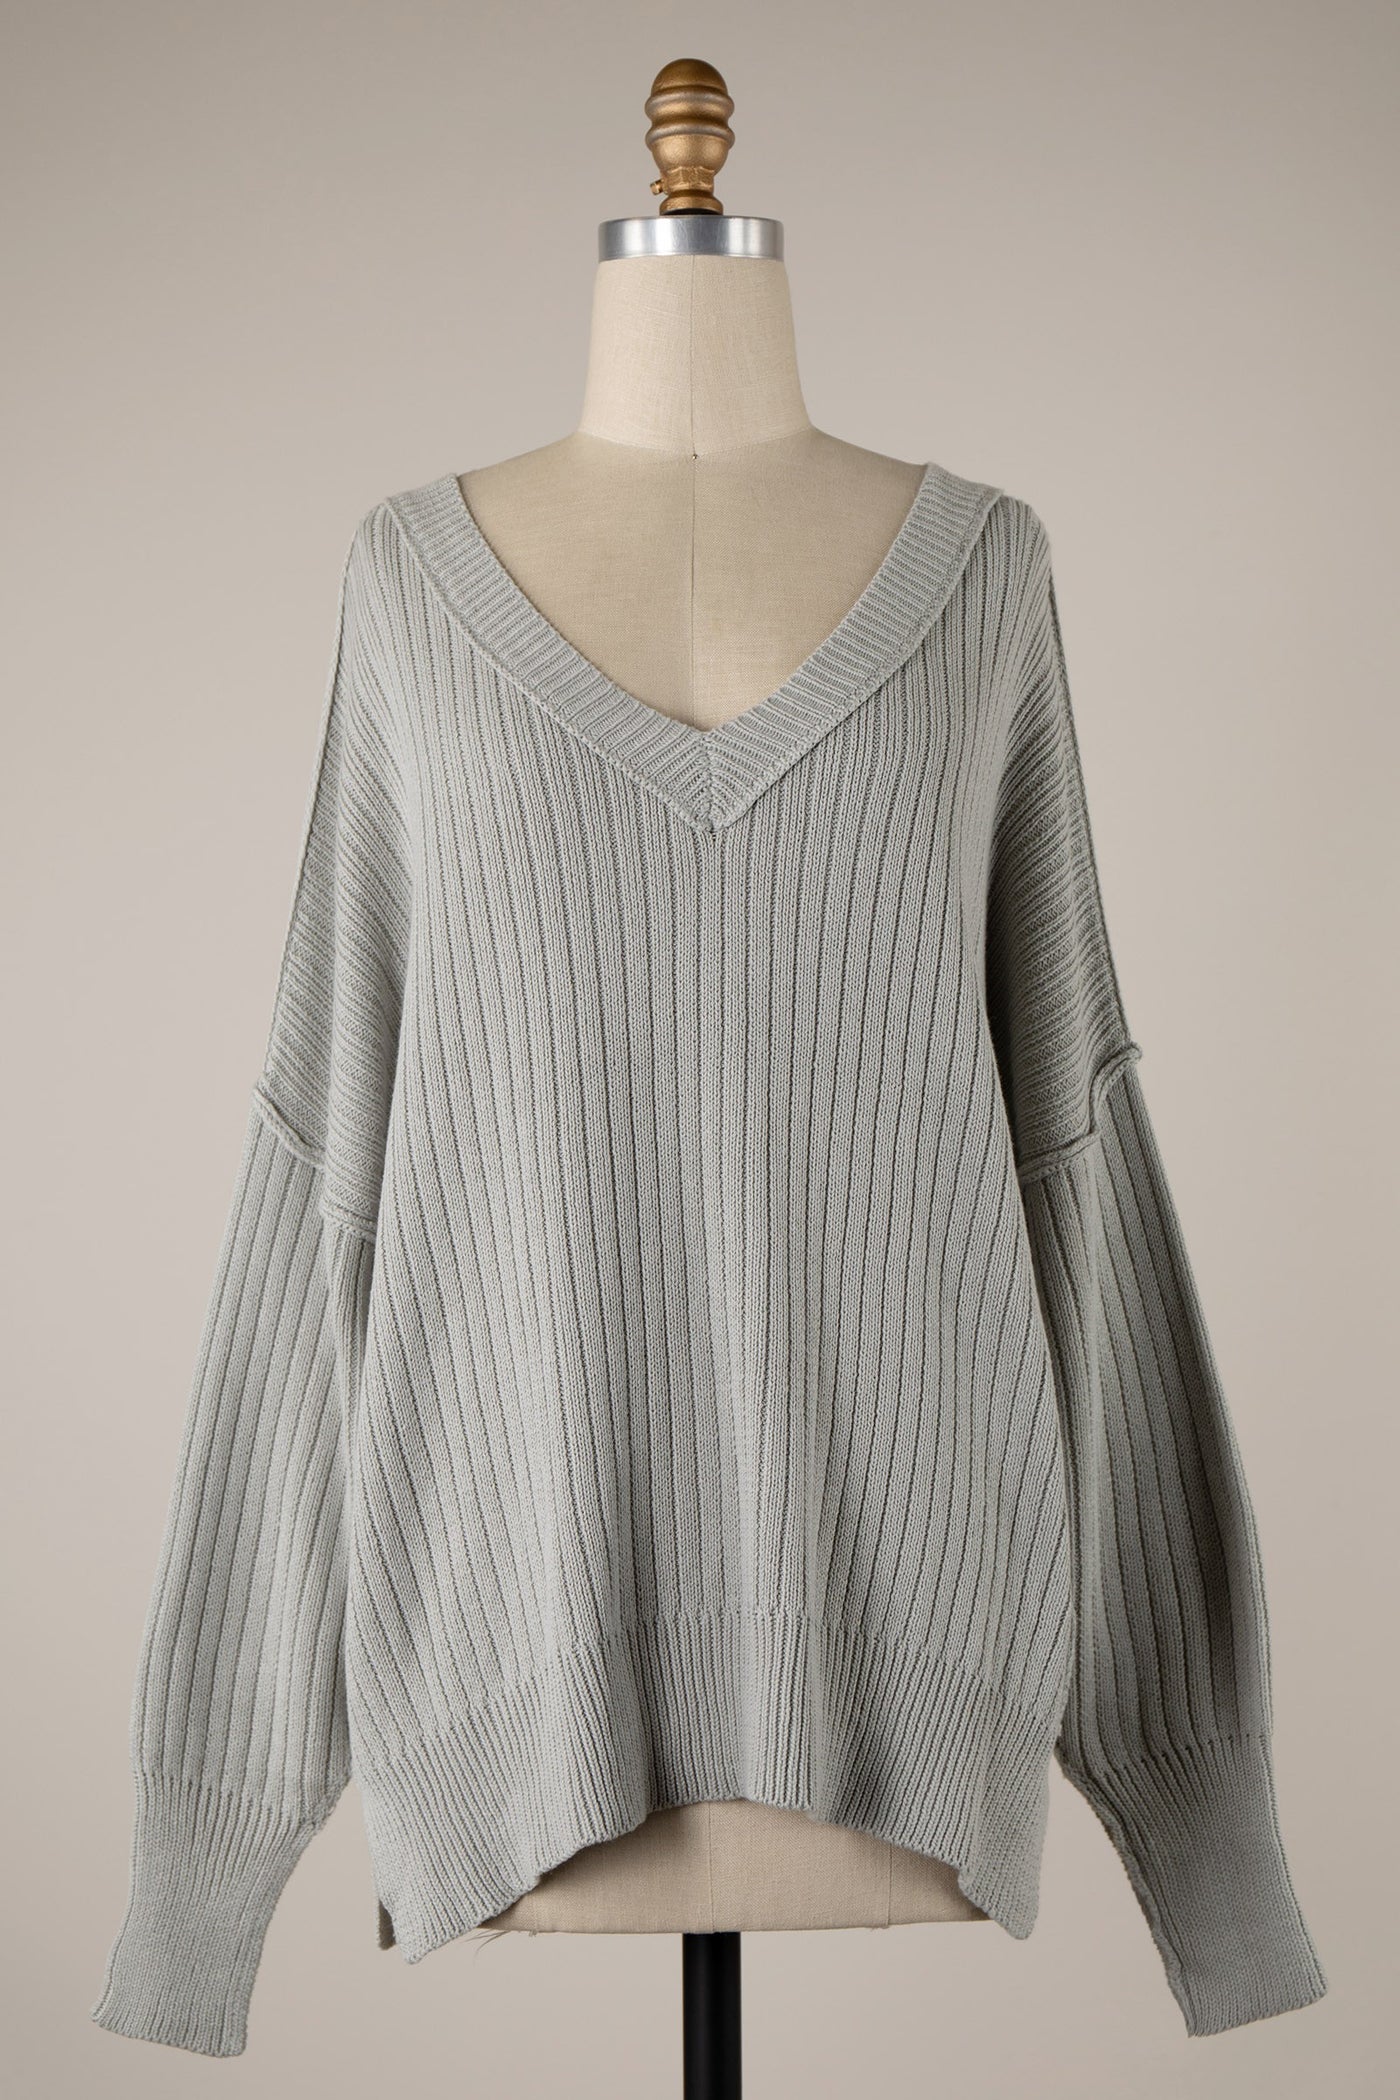 Inside Out V-Neck Light Weight Sweater- Mint